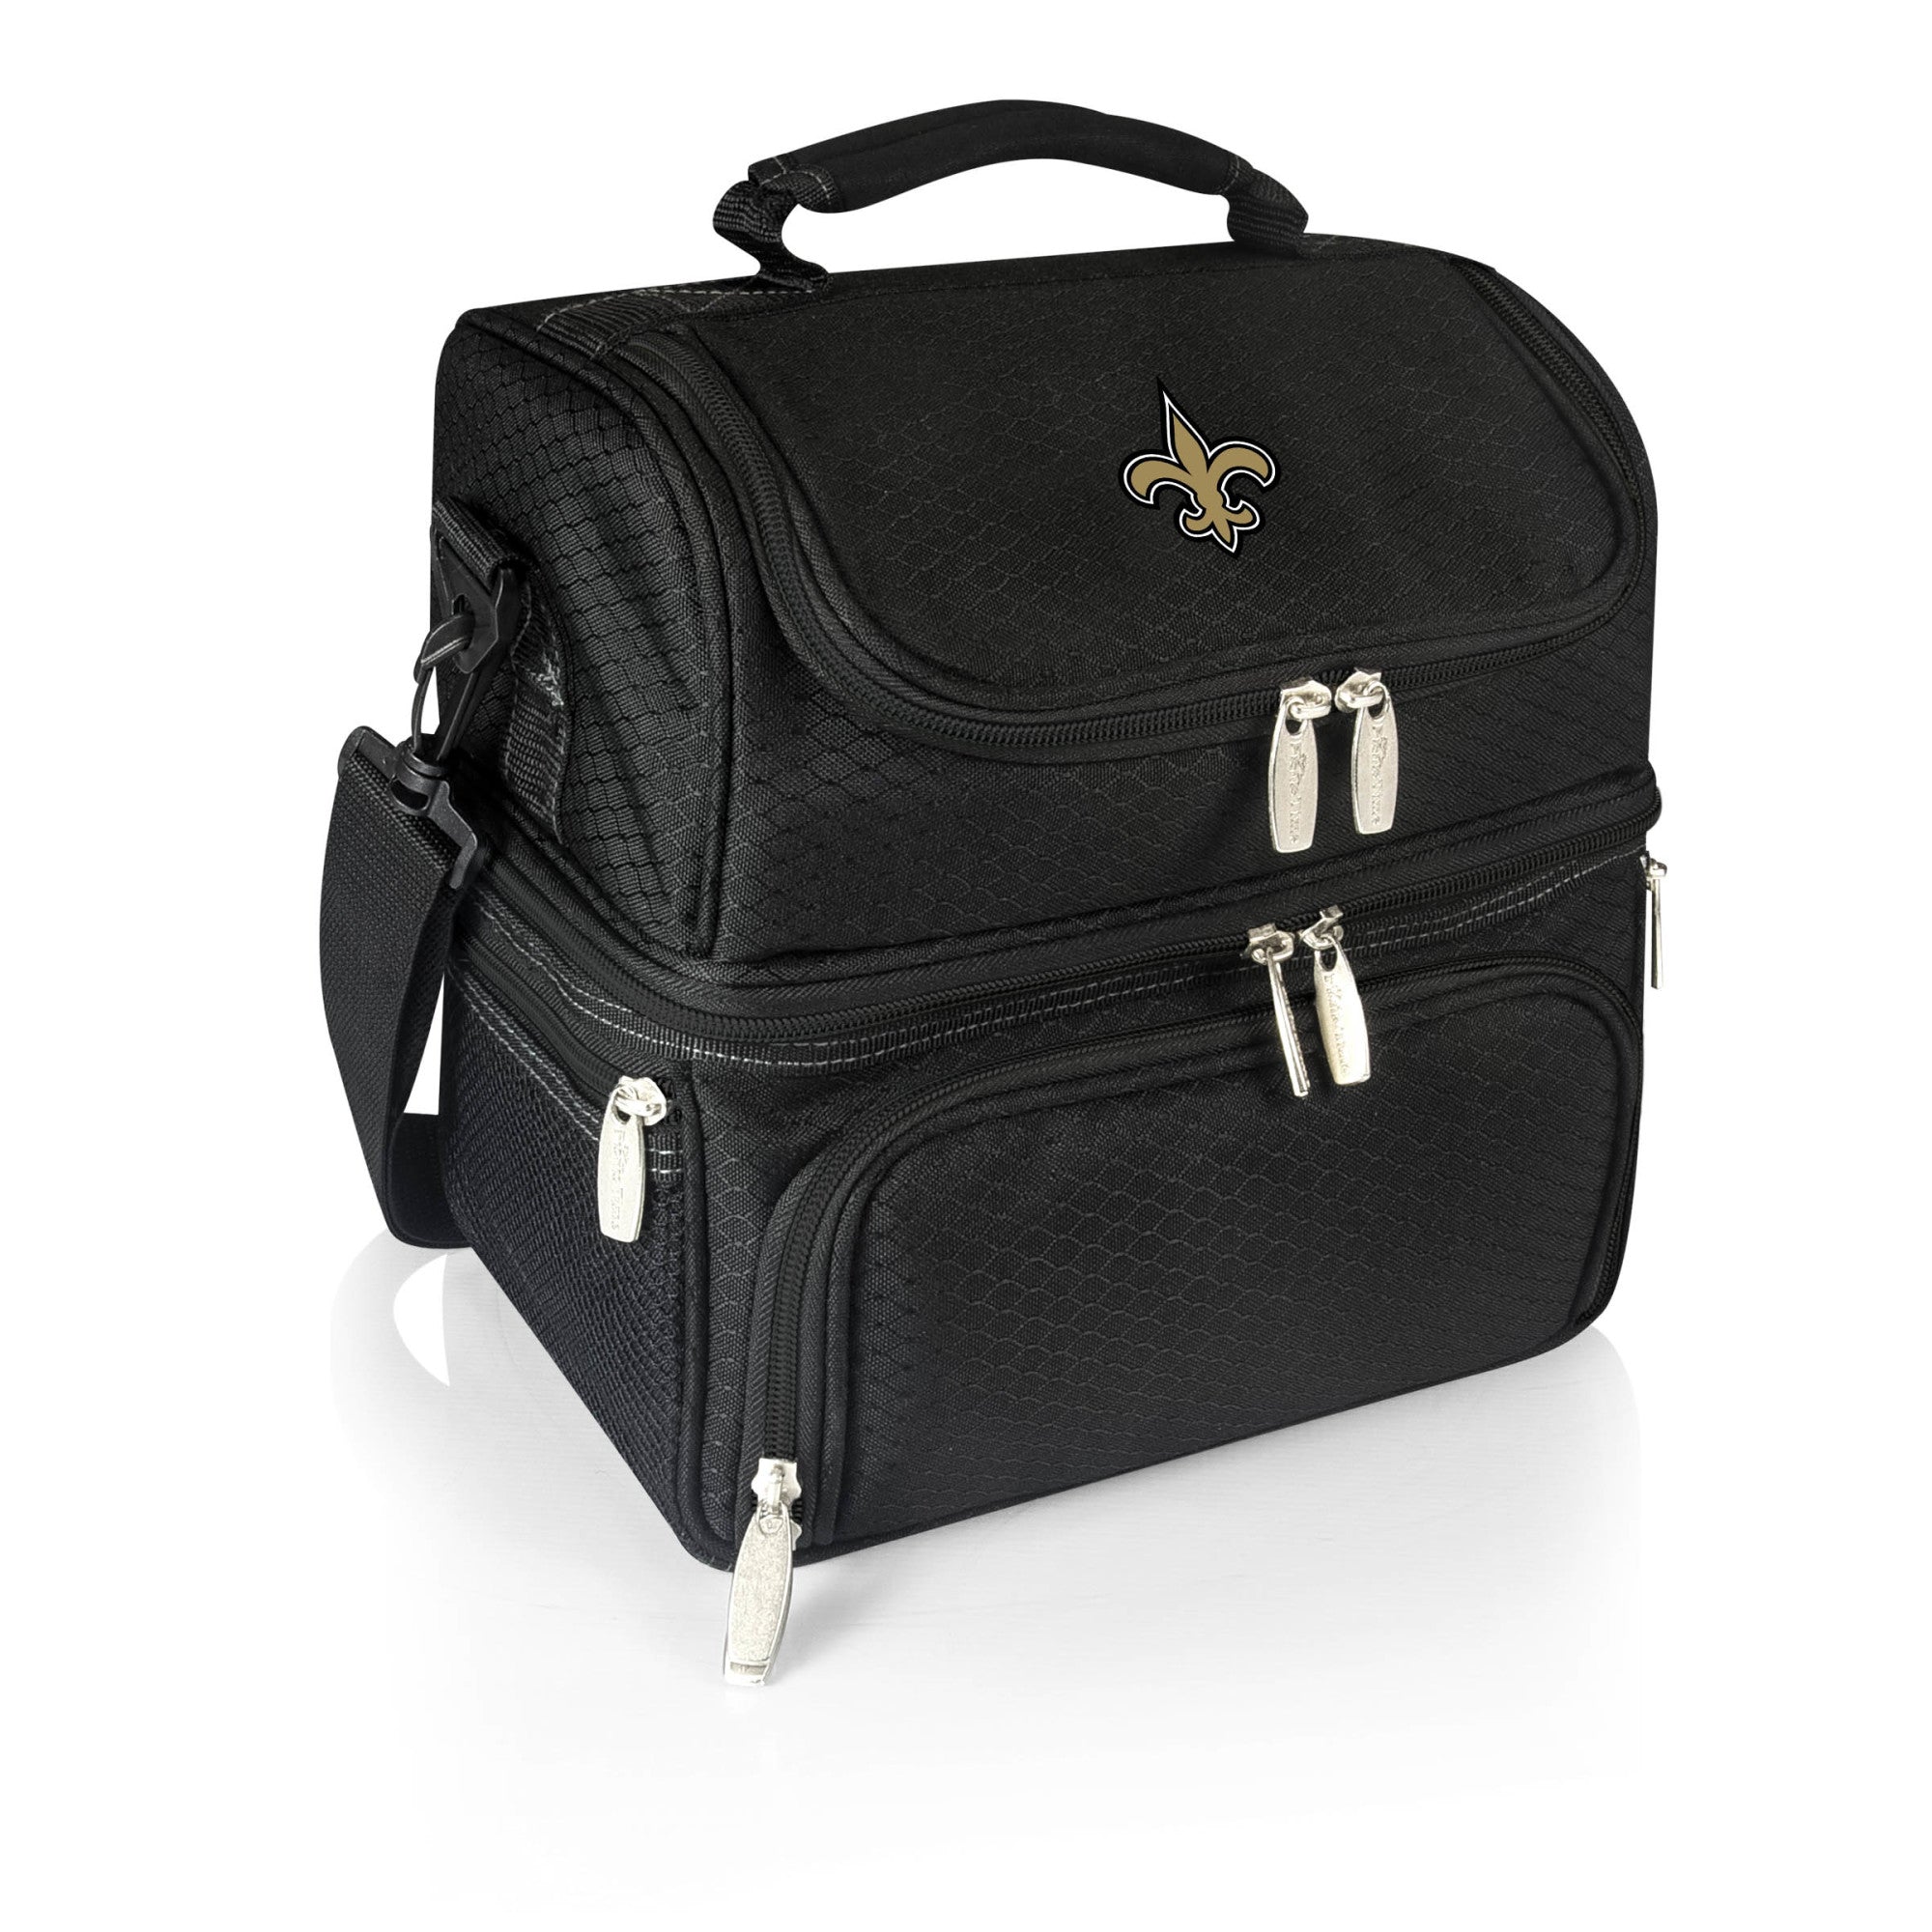 New Orleans Saints - Pranzo Lunch Bag Cooler with Utensils